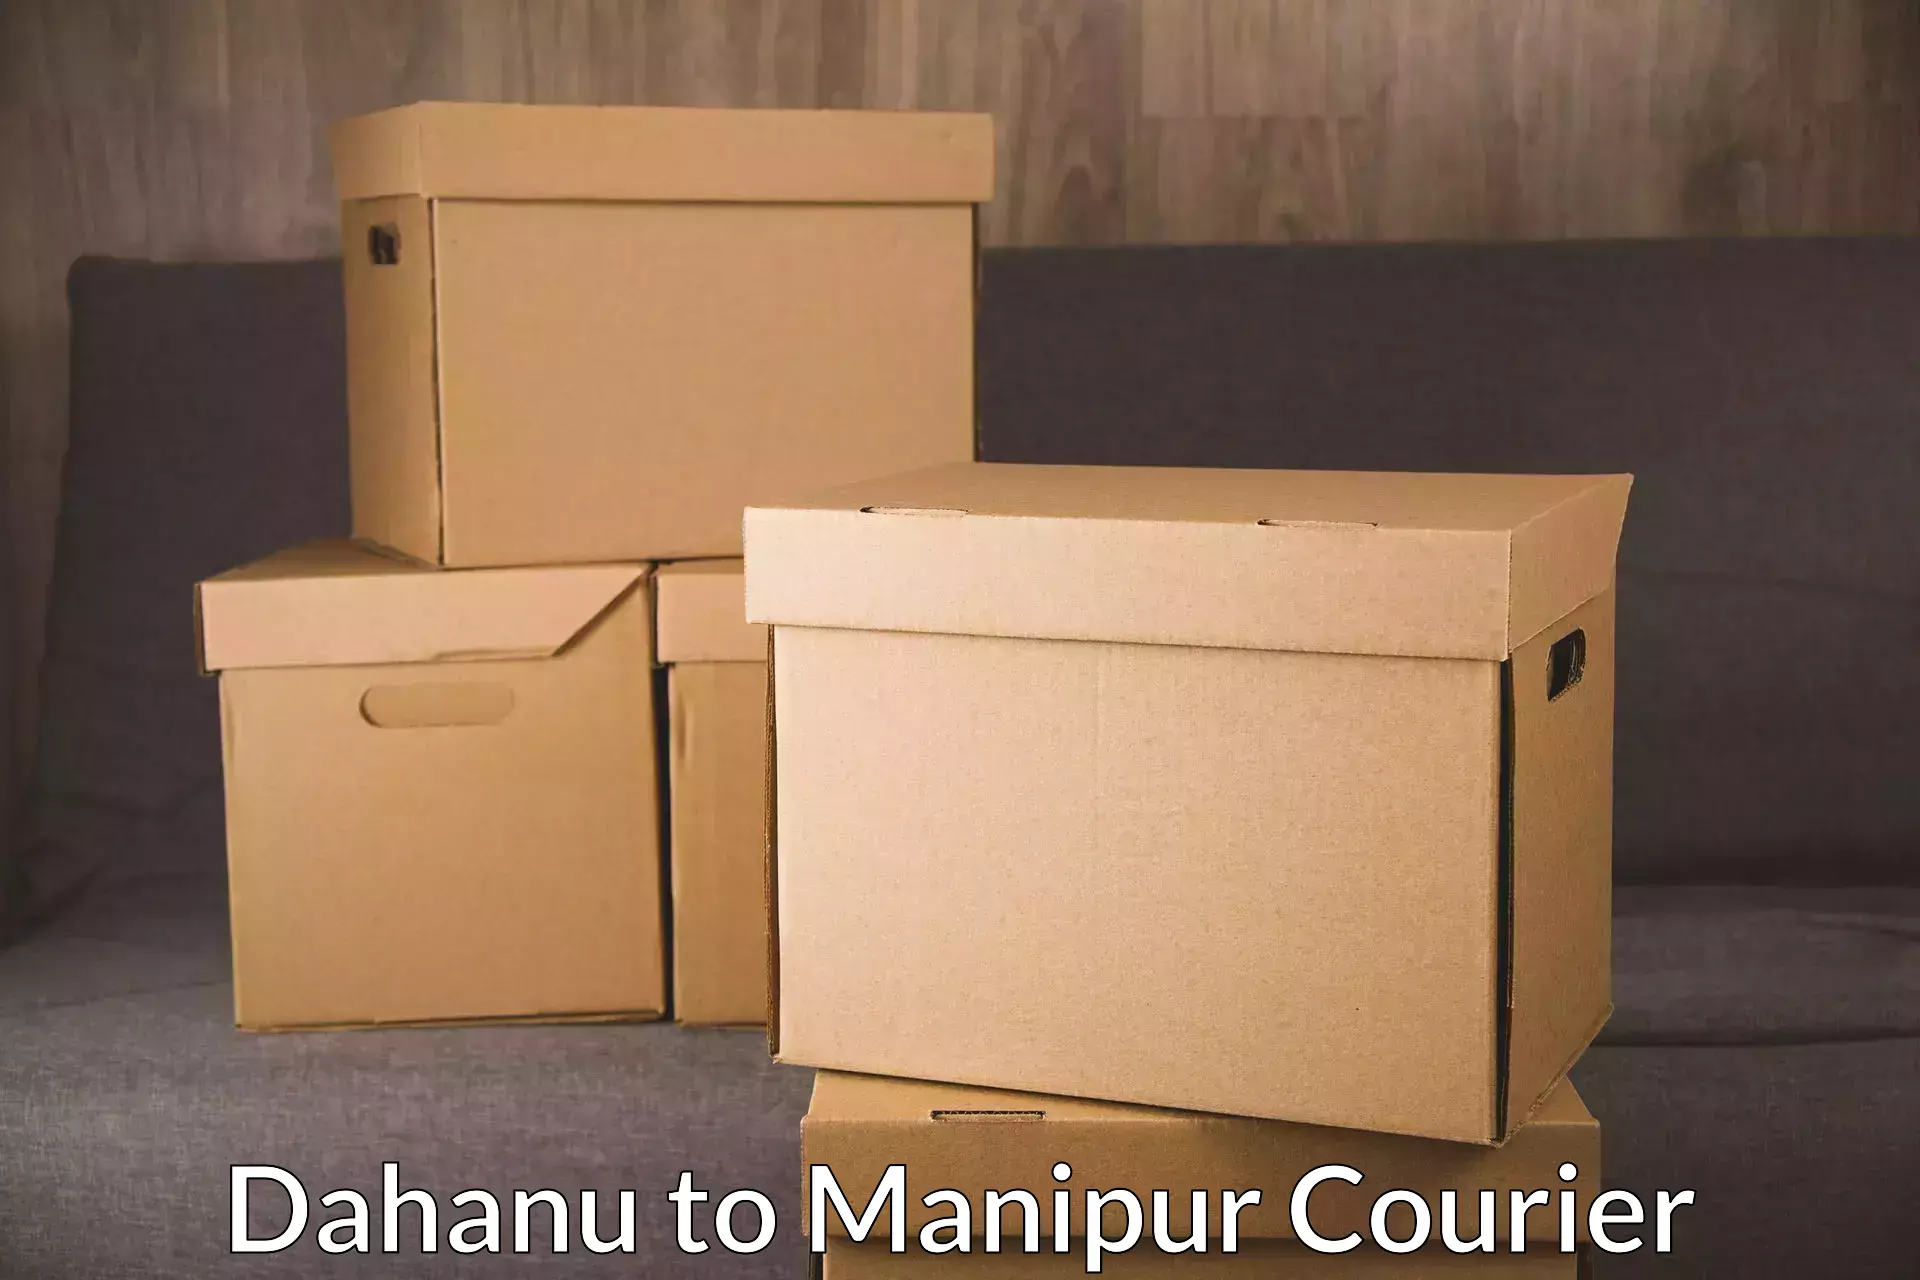 Local delivery service Dahanu to Manipur